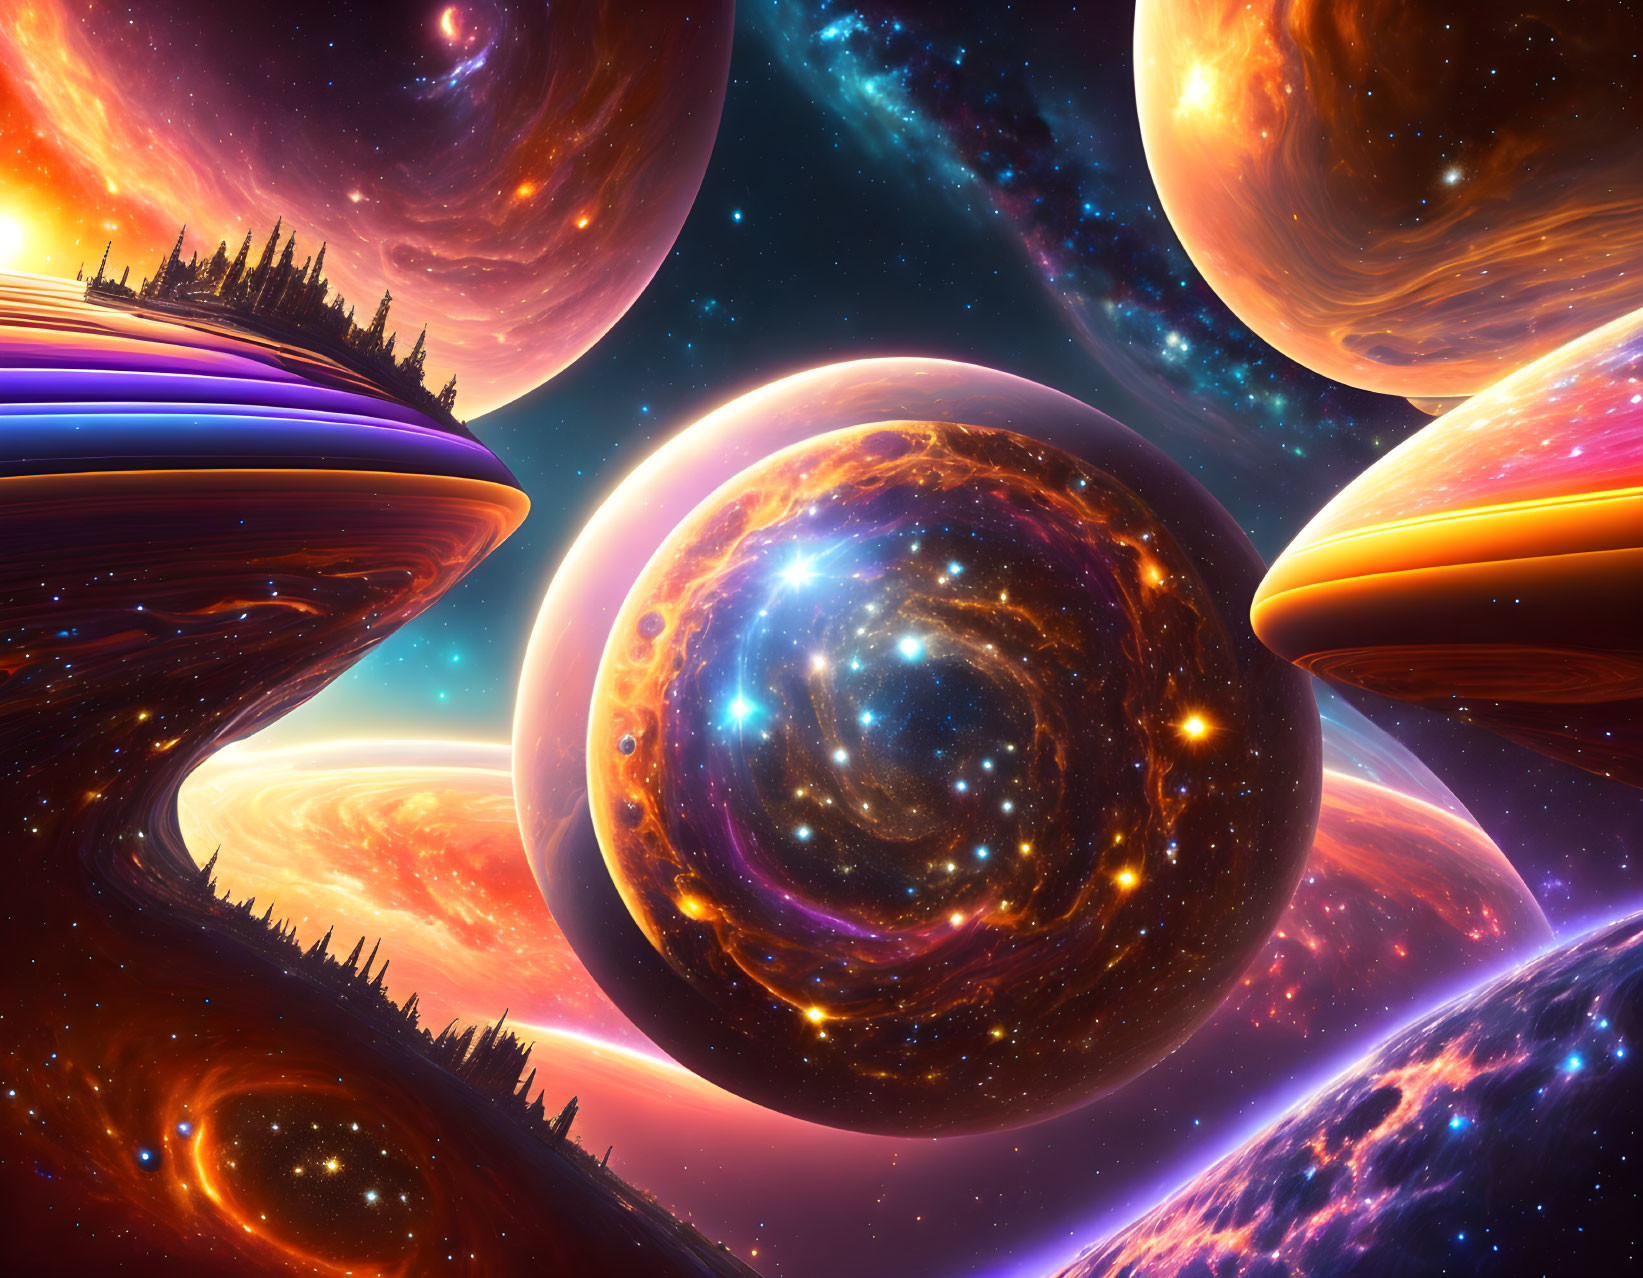 Colorful cosmic scene with planets and galaxy in blues, purples, oranges, and reds